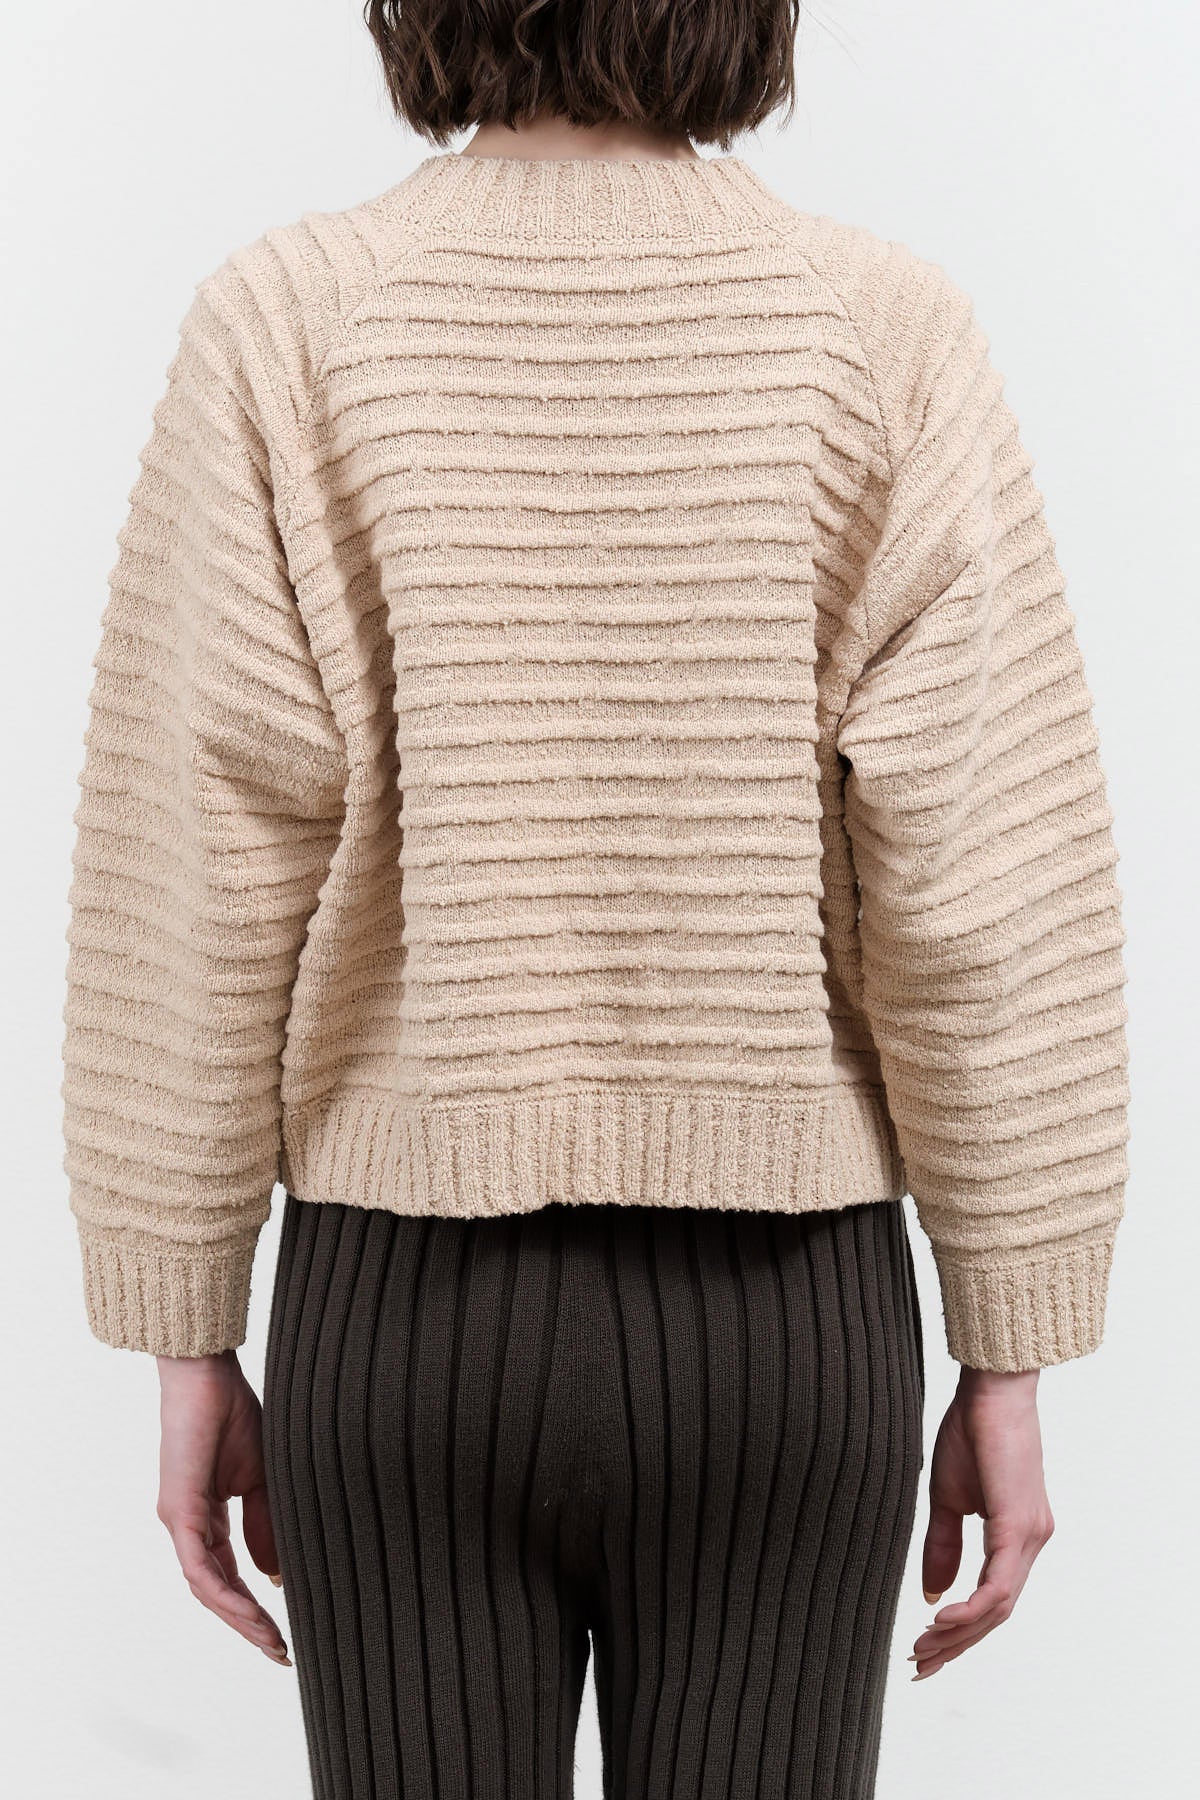 Cropped Ripple Bomber Boxy Cardigan by Wol Hide in Tan Almond with Ribbed Hem and Cuffs